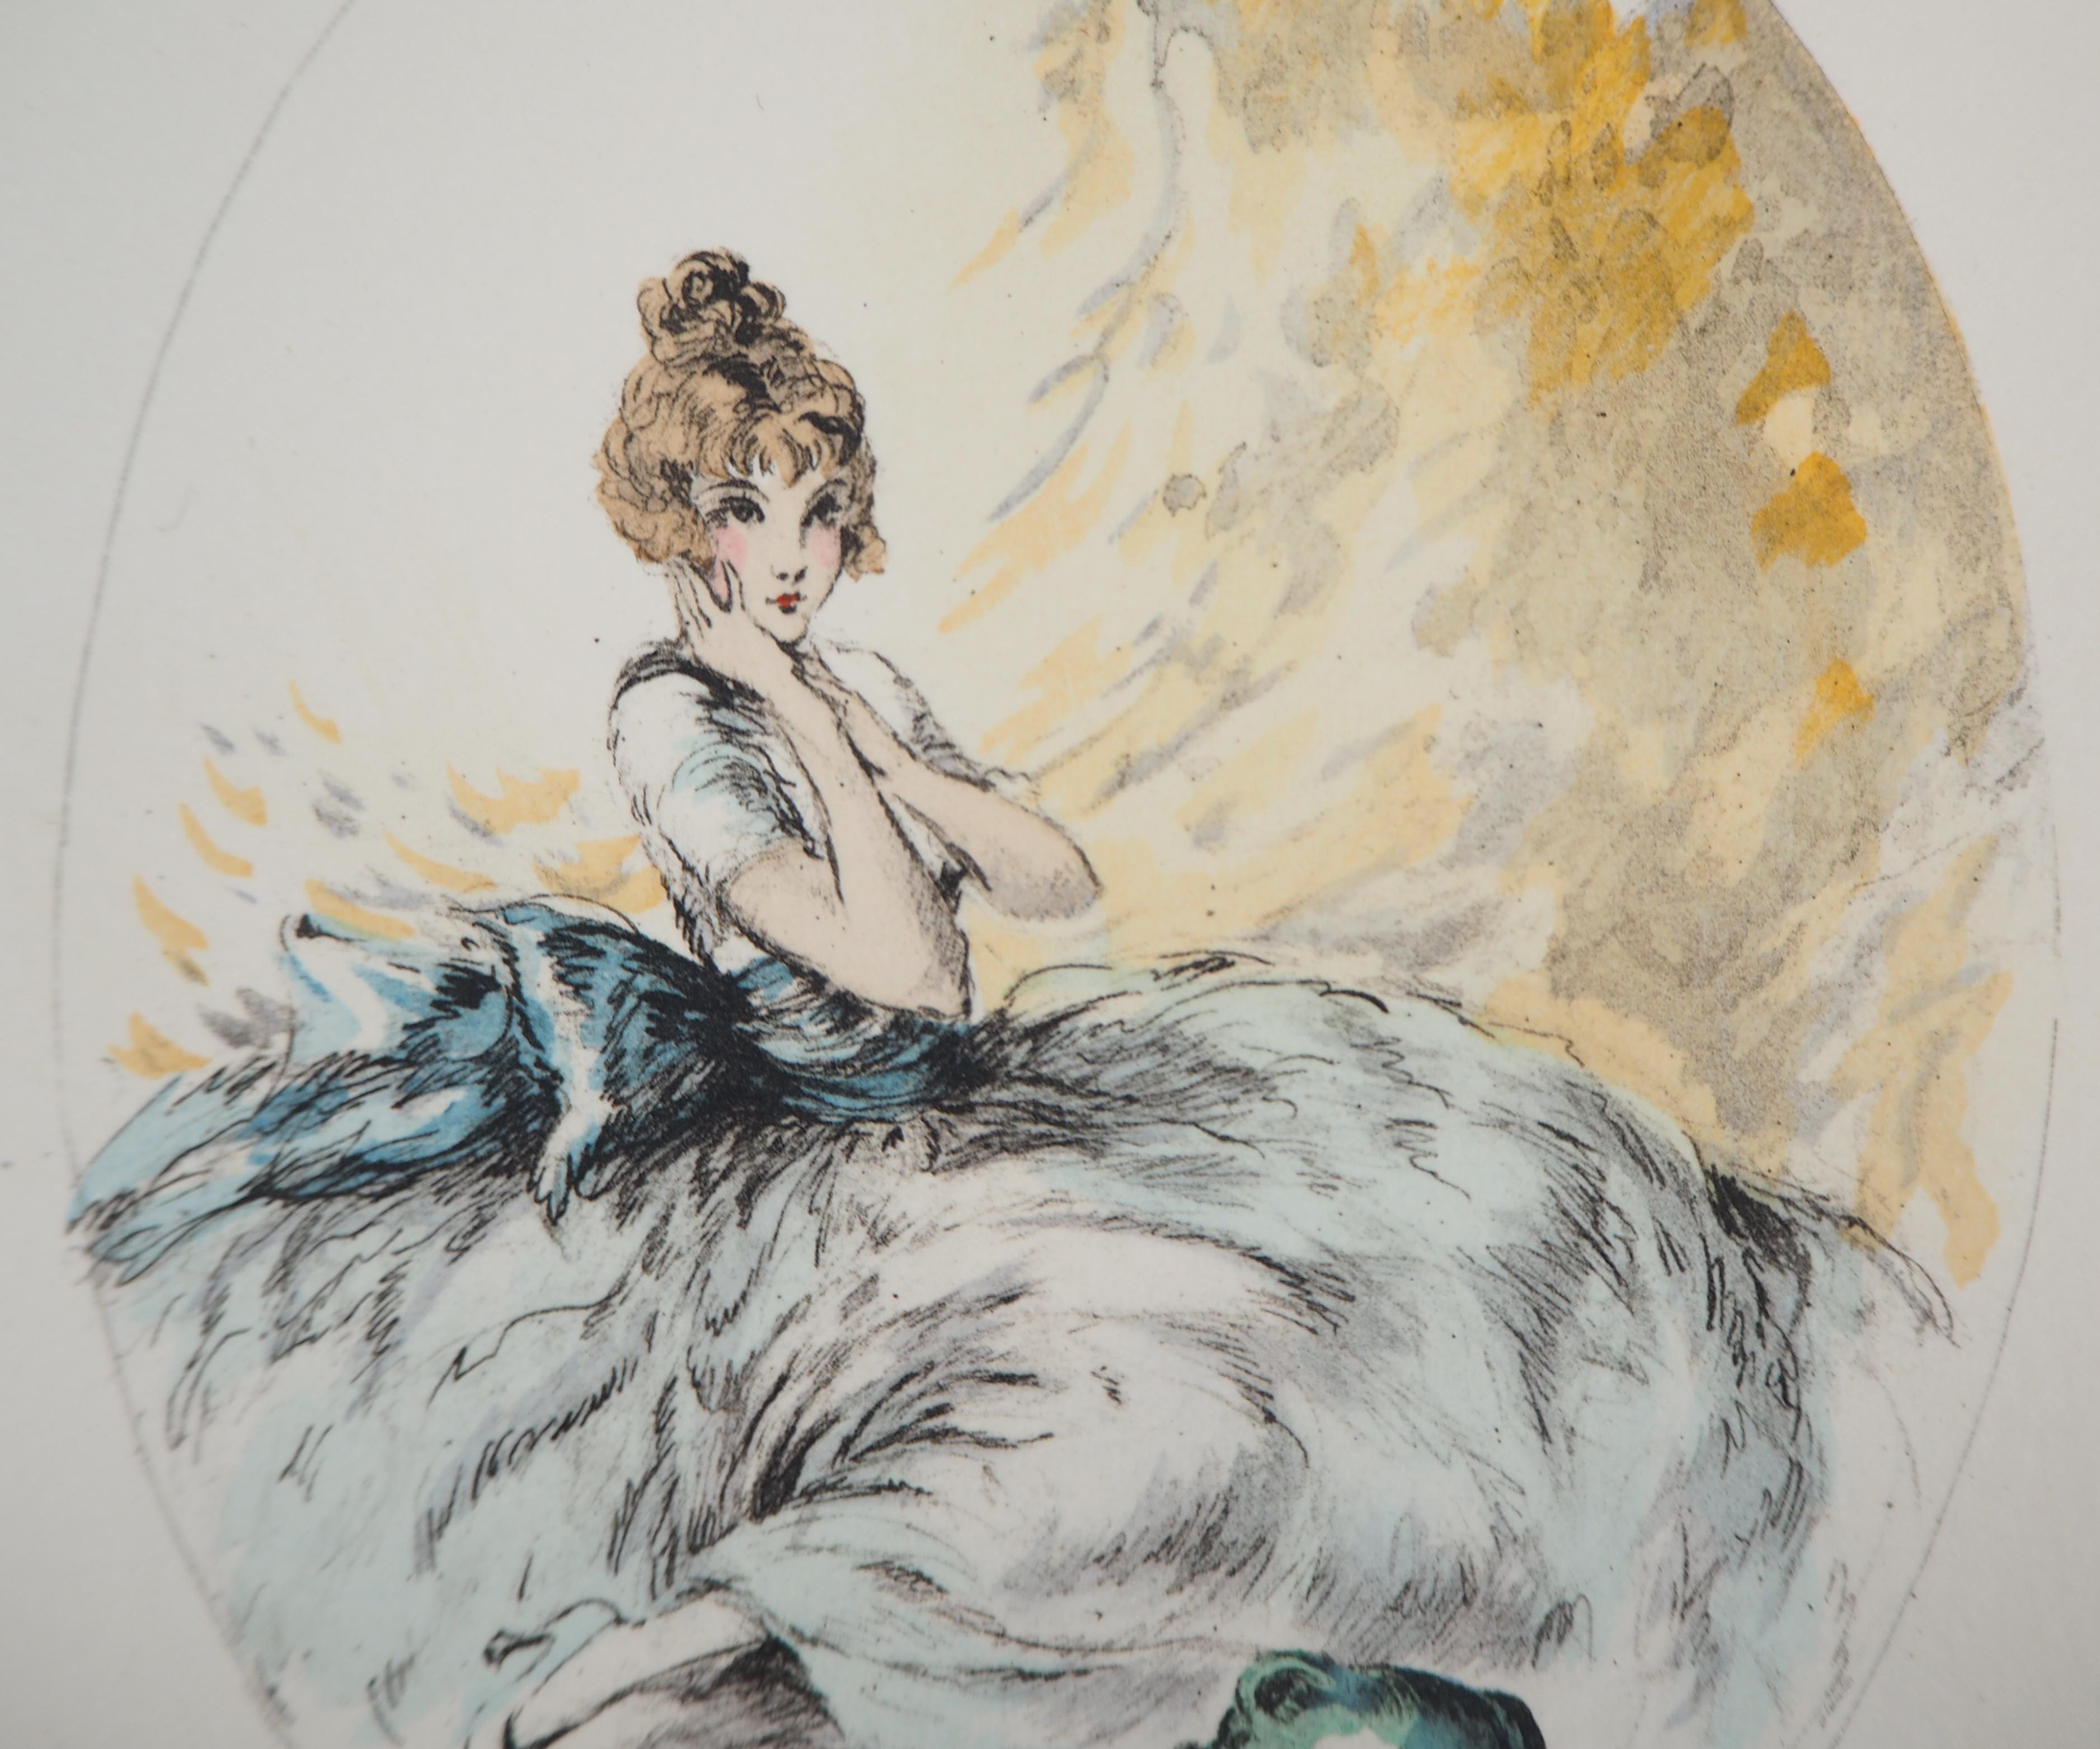 Louis Icart
Woman and the Broken Pot

Original etching and stencil
Printed signature in the plate
On vellum 16 x 22 cm (c. 6.5 x 9 in)

Excellent condition